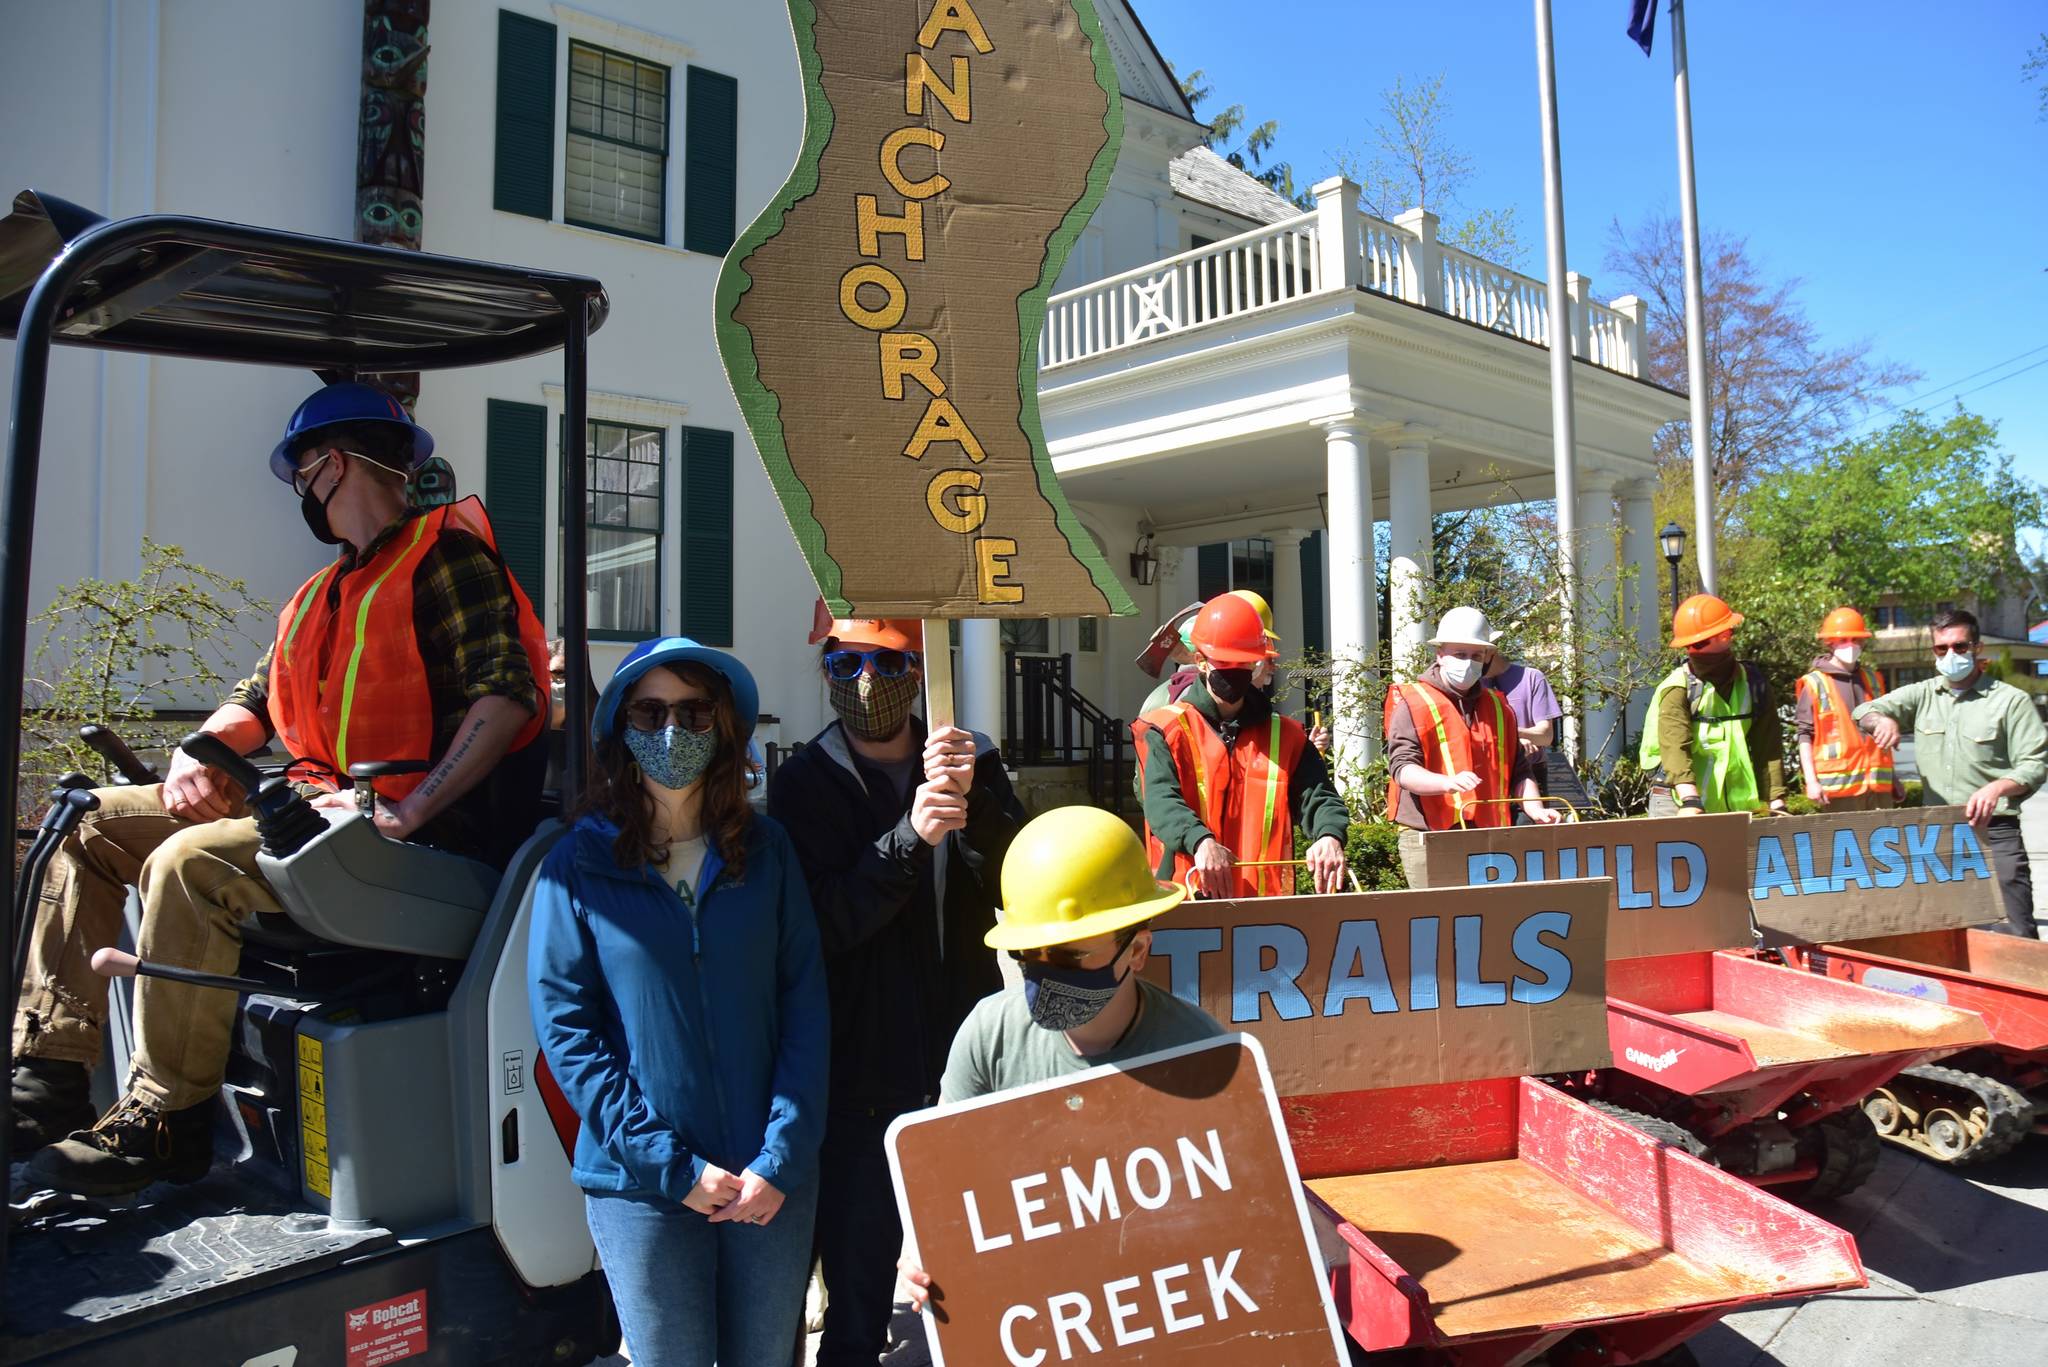 Supporters of the trail-building conservation corps started with CARES Act funding rallied in front of the Governor's Mansion on Tuesday, May 18, 2021, to urge state officials to continue funding the programs. (Peter Segall / Juneau Empire)